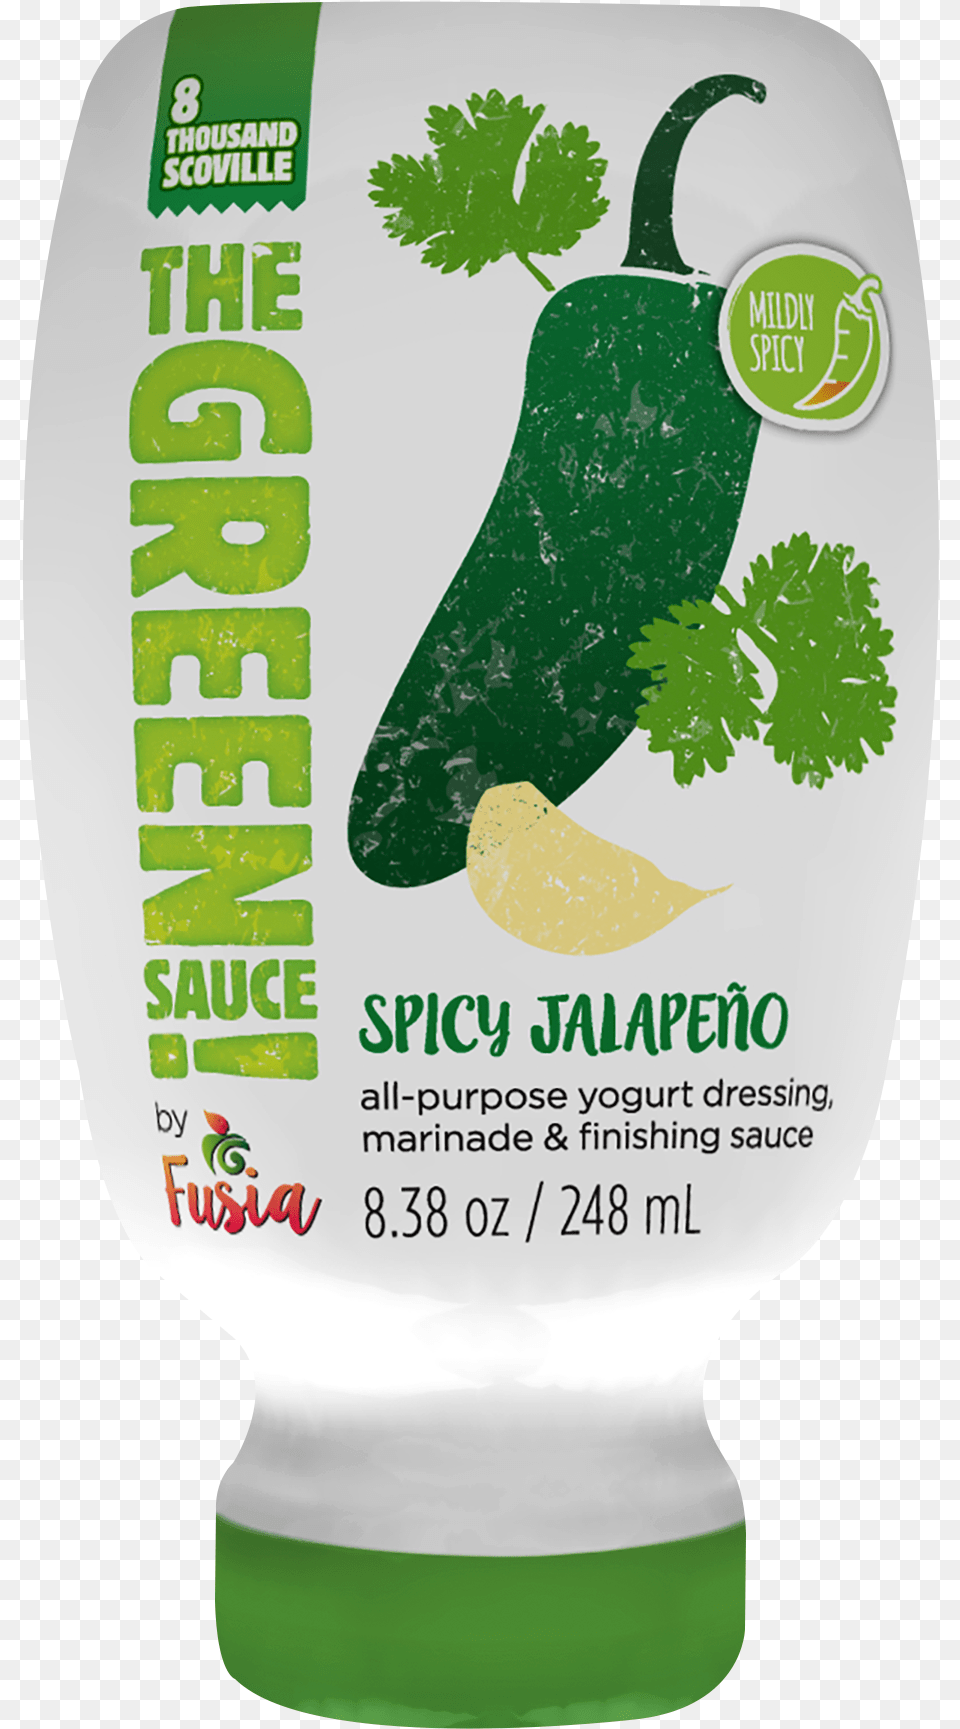 Picture Of Spicy Jalapeno Green Sauce In Its Packaging Snap Pea, Herbs, Plant, Herbal, Bottle Png